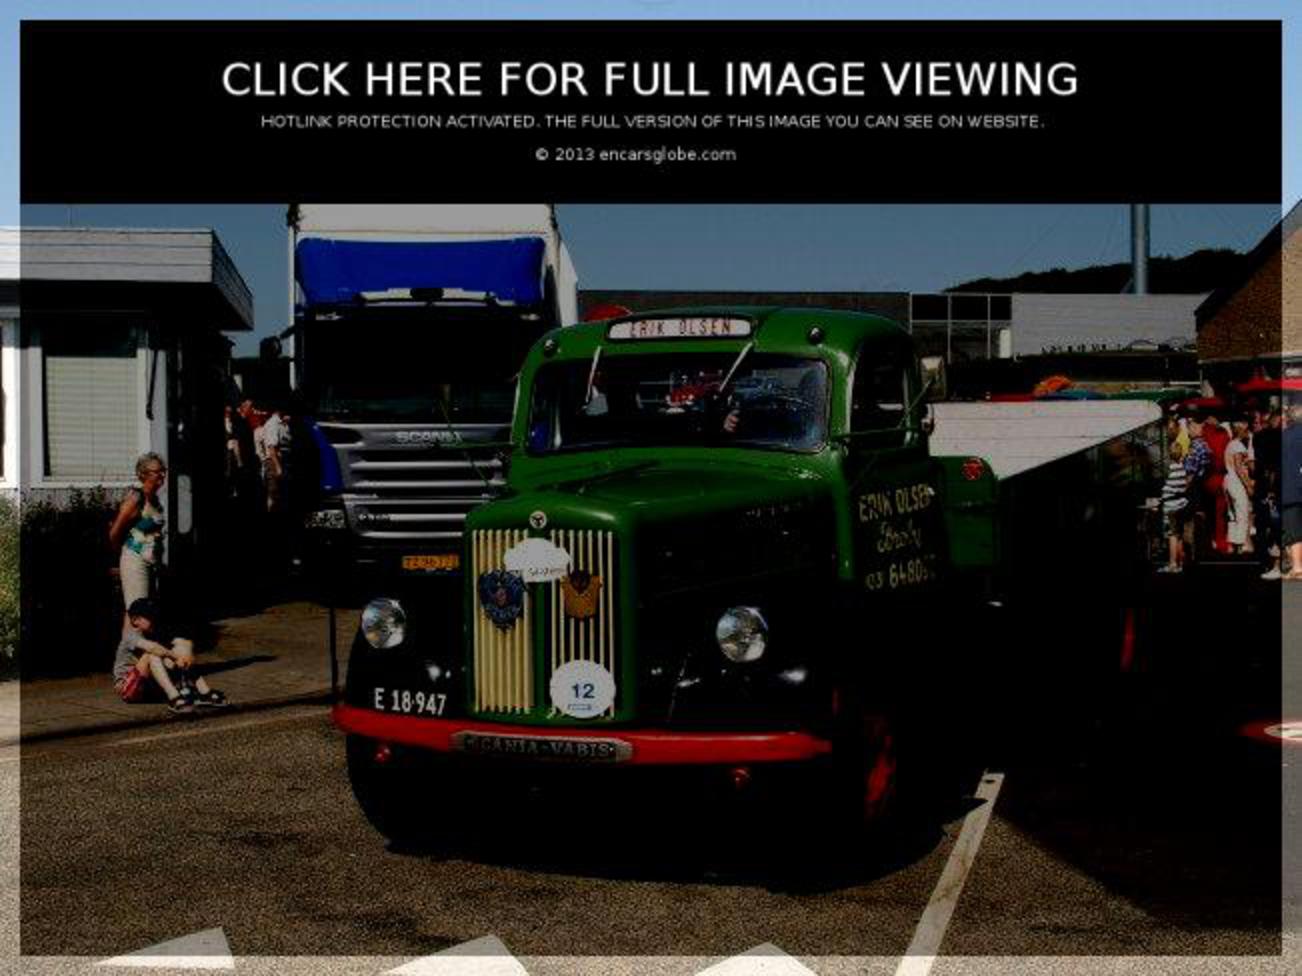 Scania-Vabis LS 111 S 42: Photo gallery, complete information ...